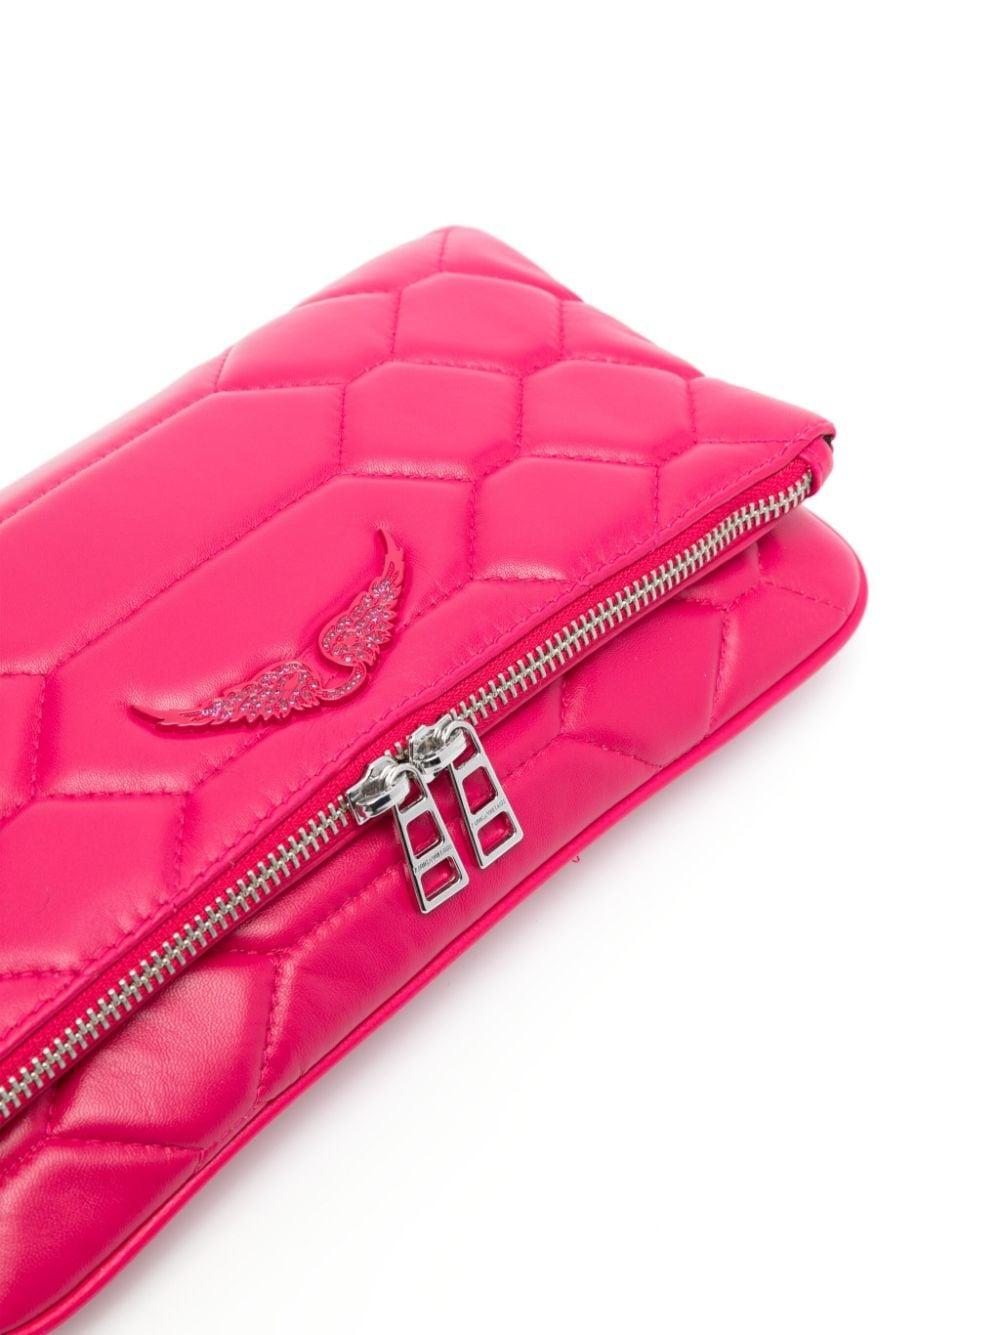 Zadig & Voltaire Large Rock Quilted Crossbody Bag in Pink | Lyst